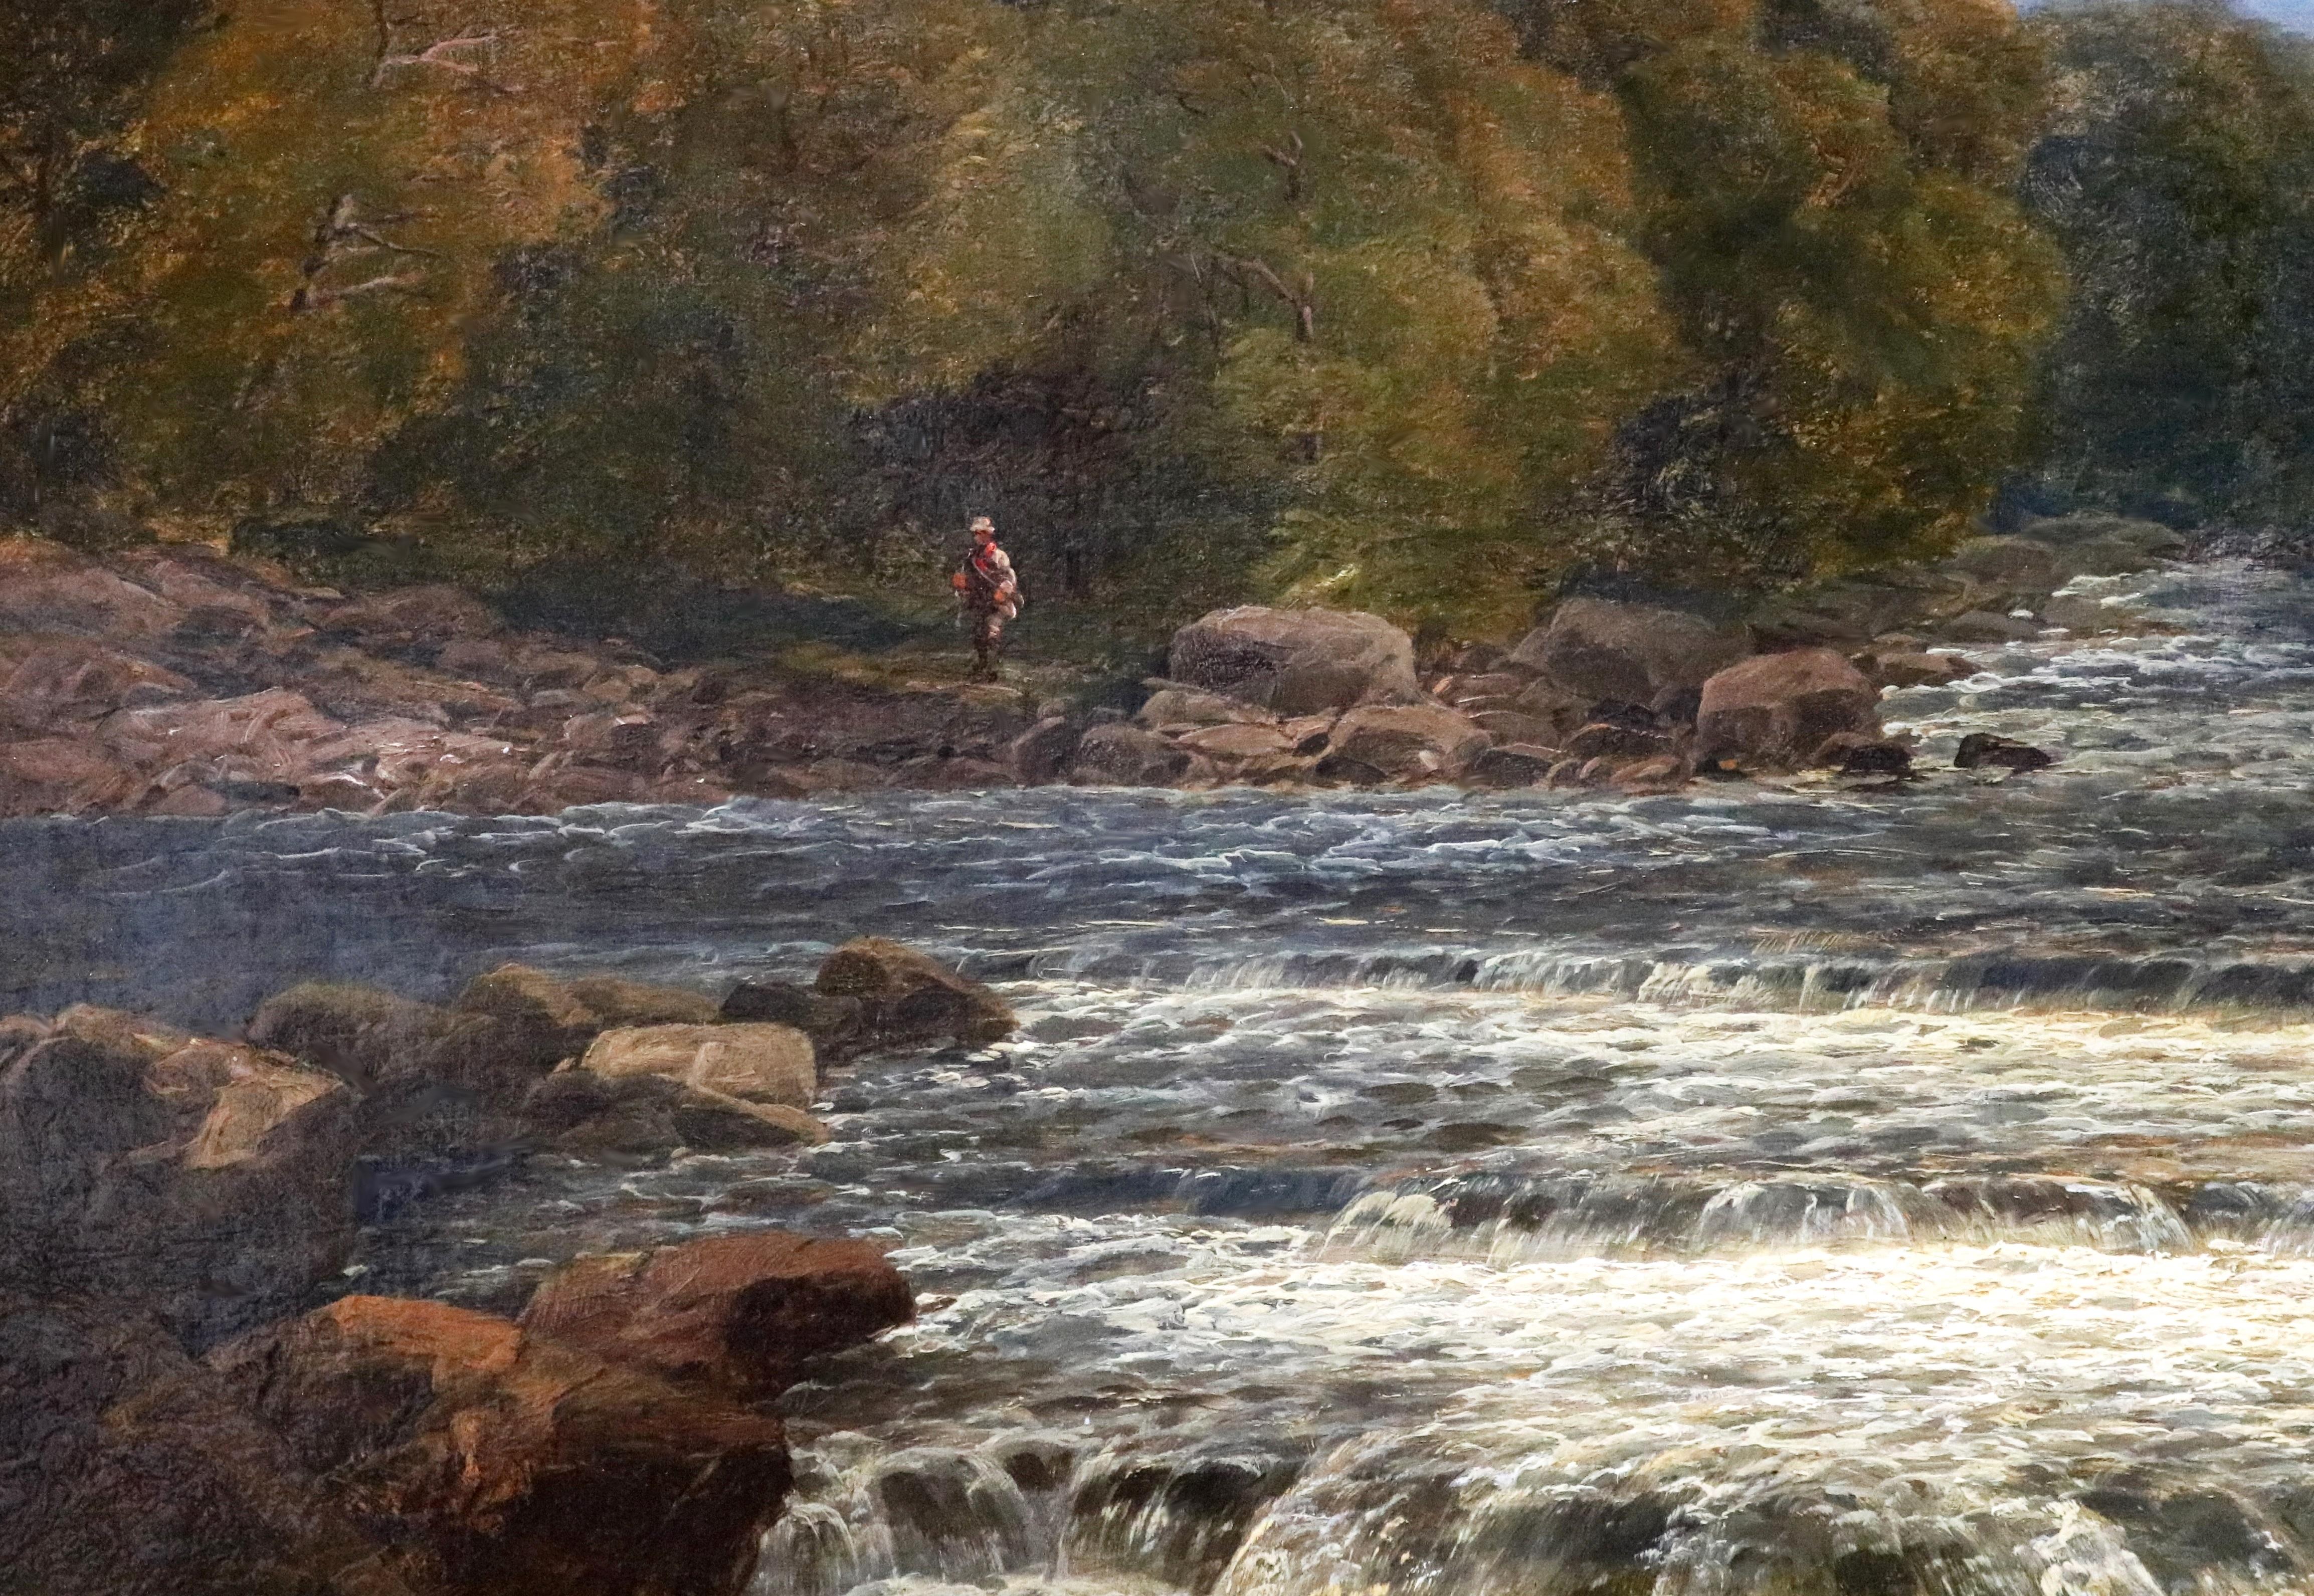 On the Dee, North Wales - 19th Century Landscape Oil Painting of Angler Fishing  1